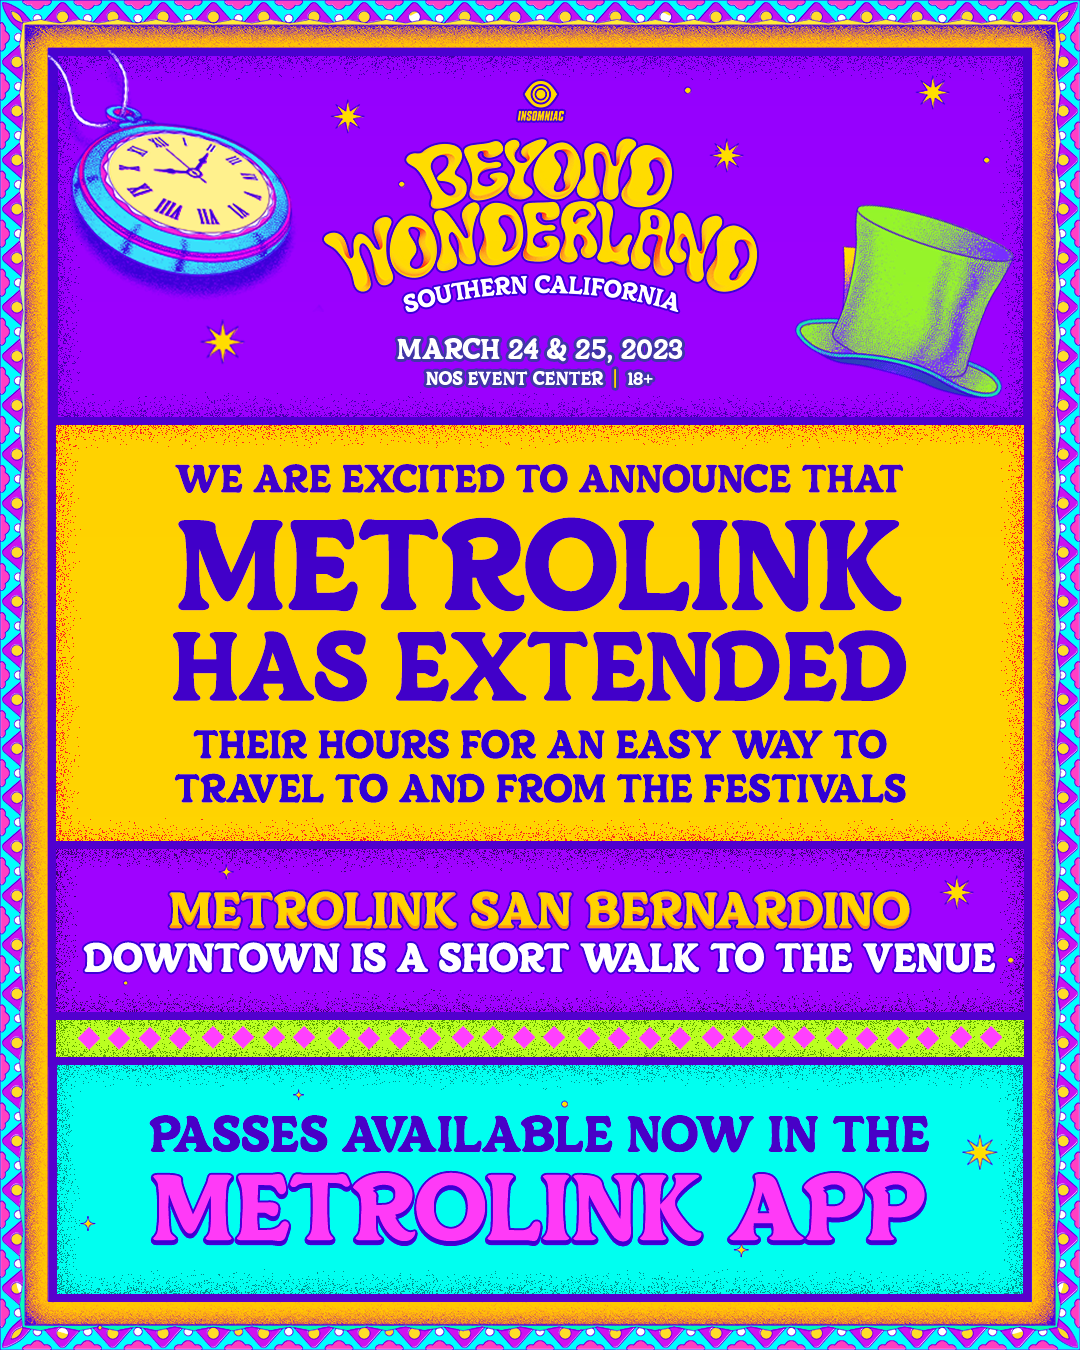 Beyond Wonderland Southern California March 24 & 25 2023 NOS Events Center. We are excited to announce that Metrolink has extended their hours for an easy way to travel to and from the festivals - Metrolink San Bernardino Downtown is a short walk to the venue - passes available now in the Metrolink App